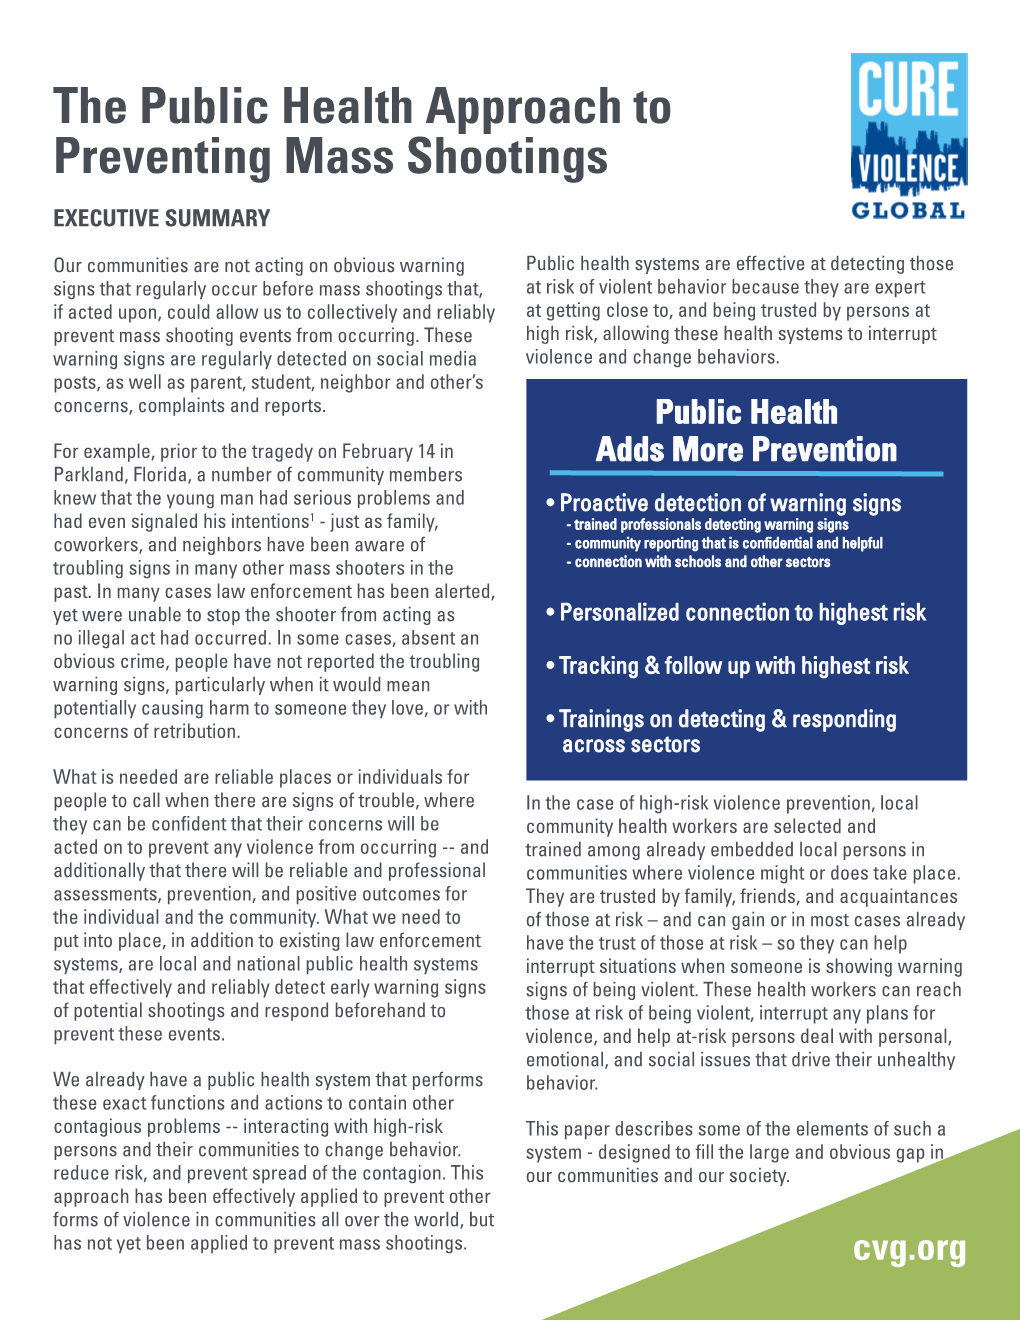 Public Health Approach to Mass Shootings